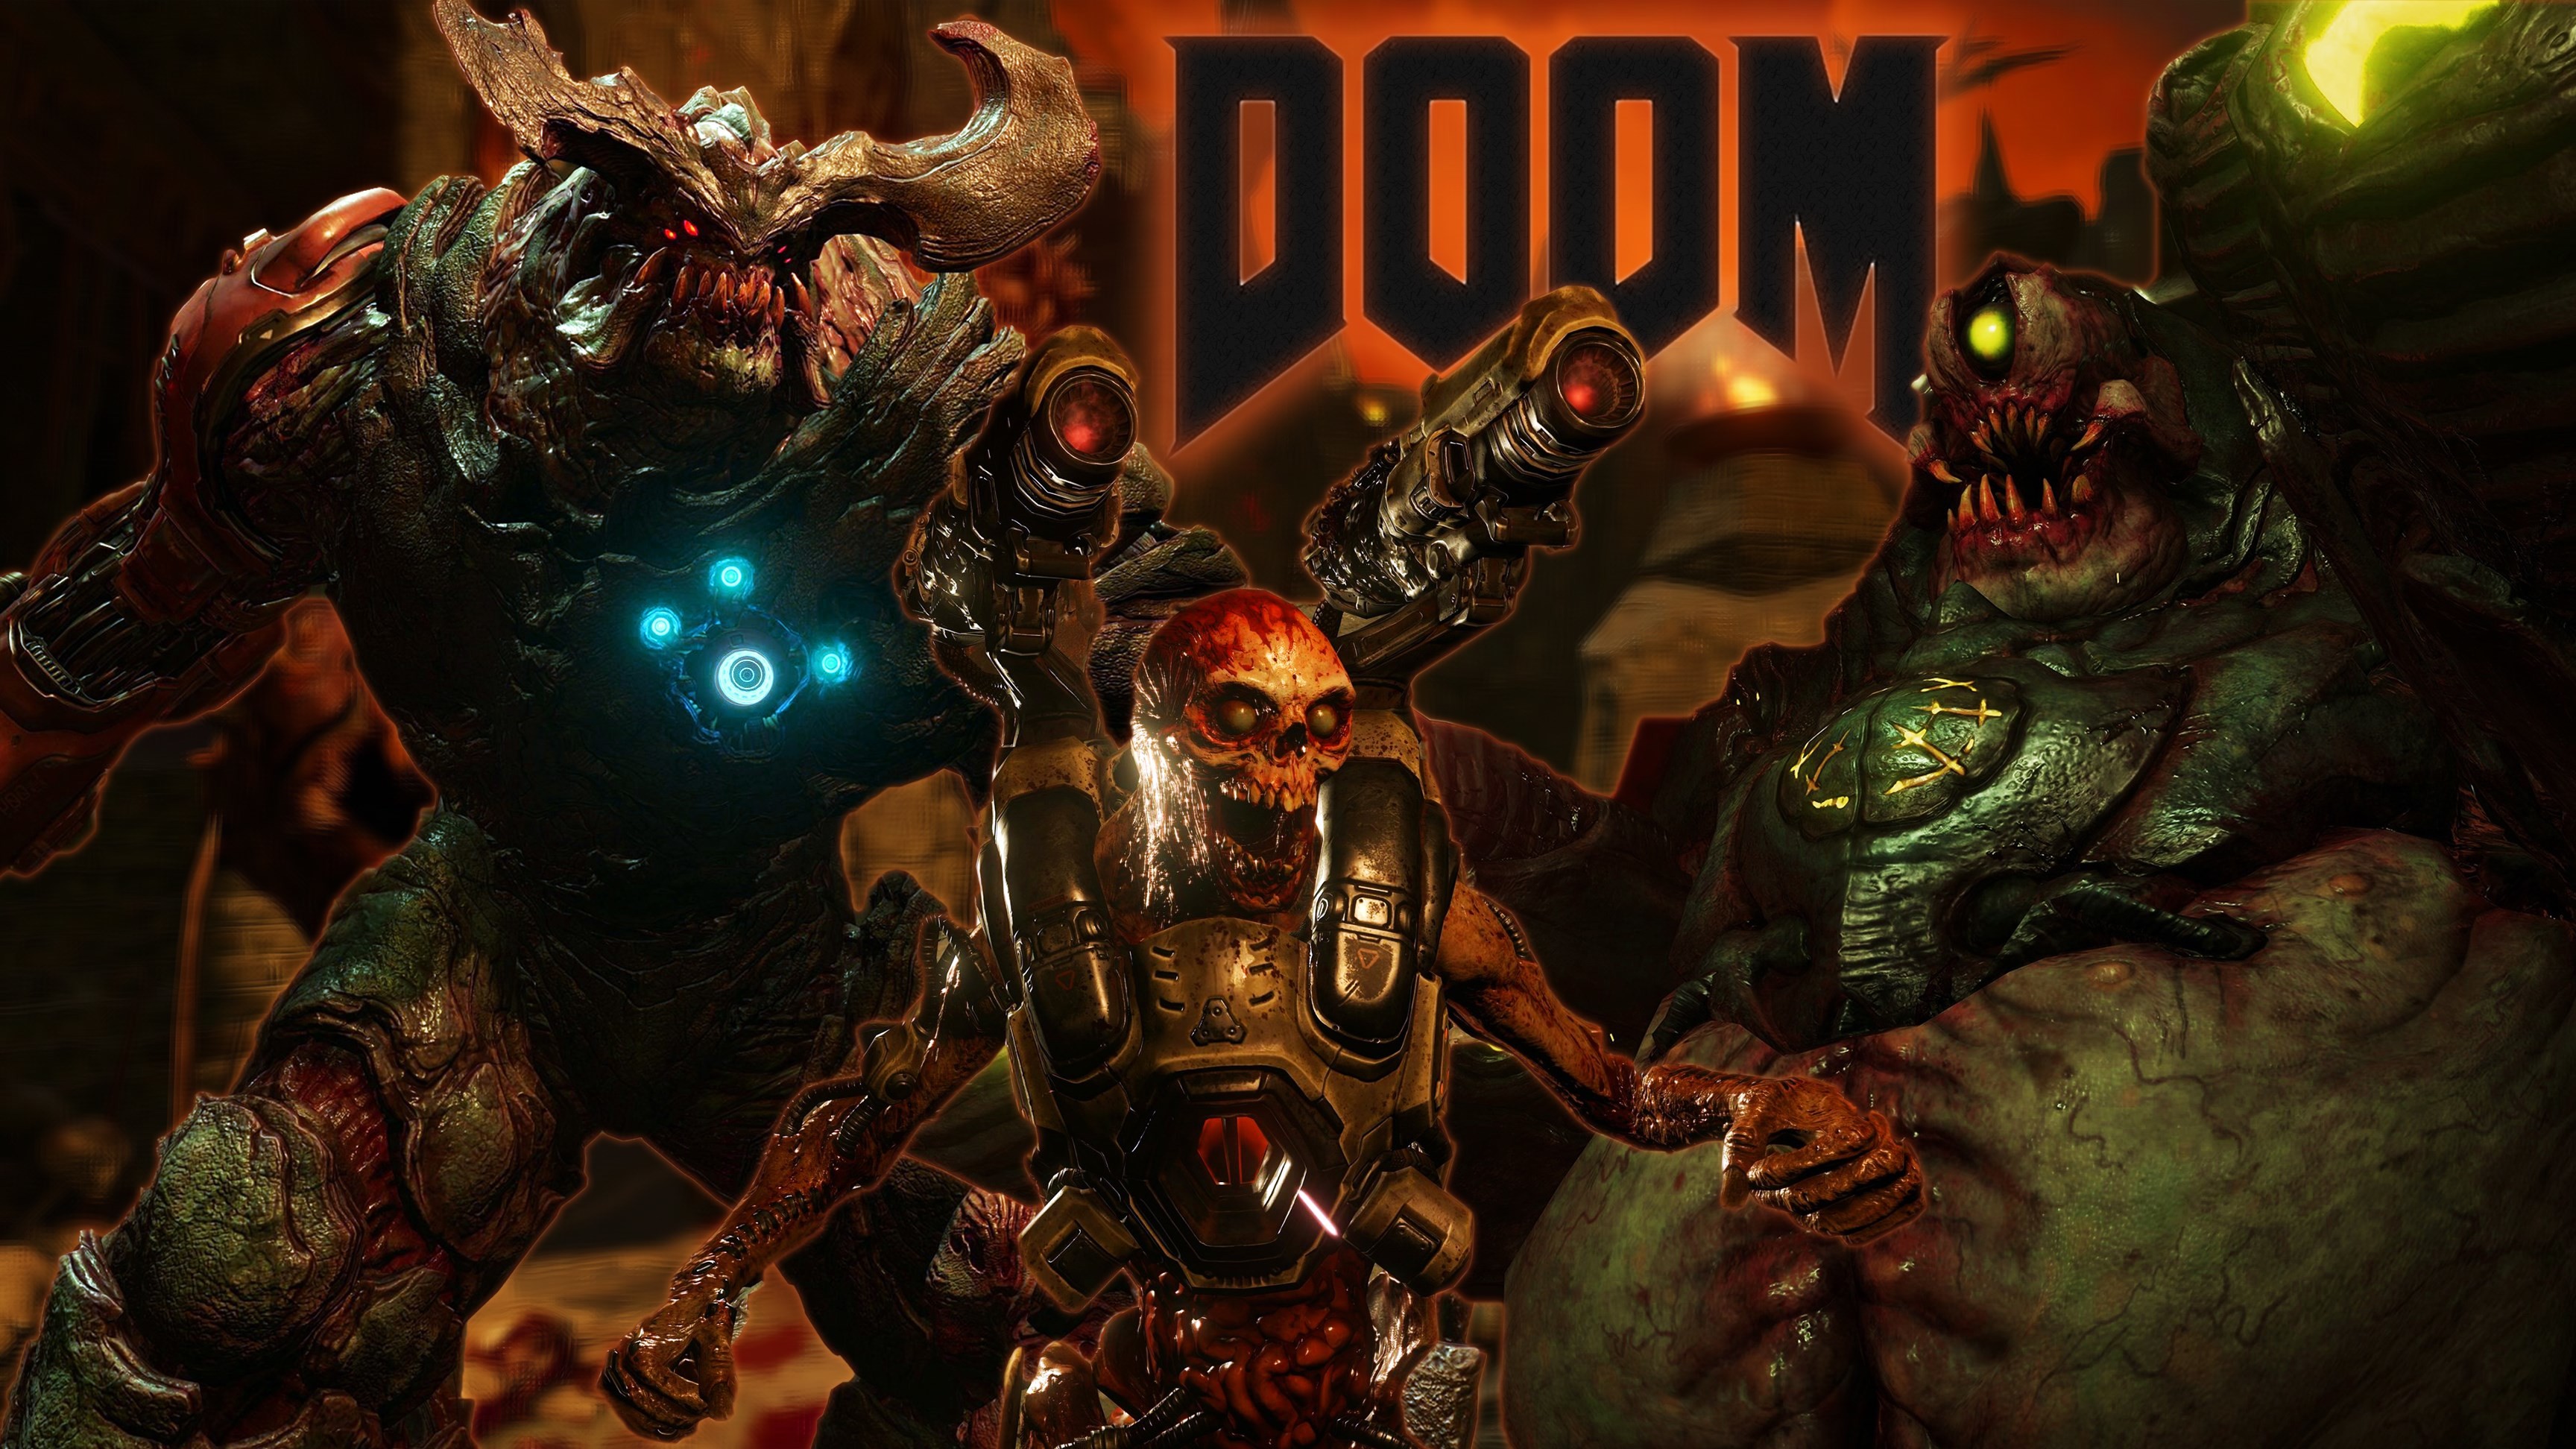 doom wallpaper 1080p,action adventure game,pc game,strategy video game,fictional character,games